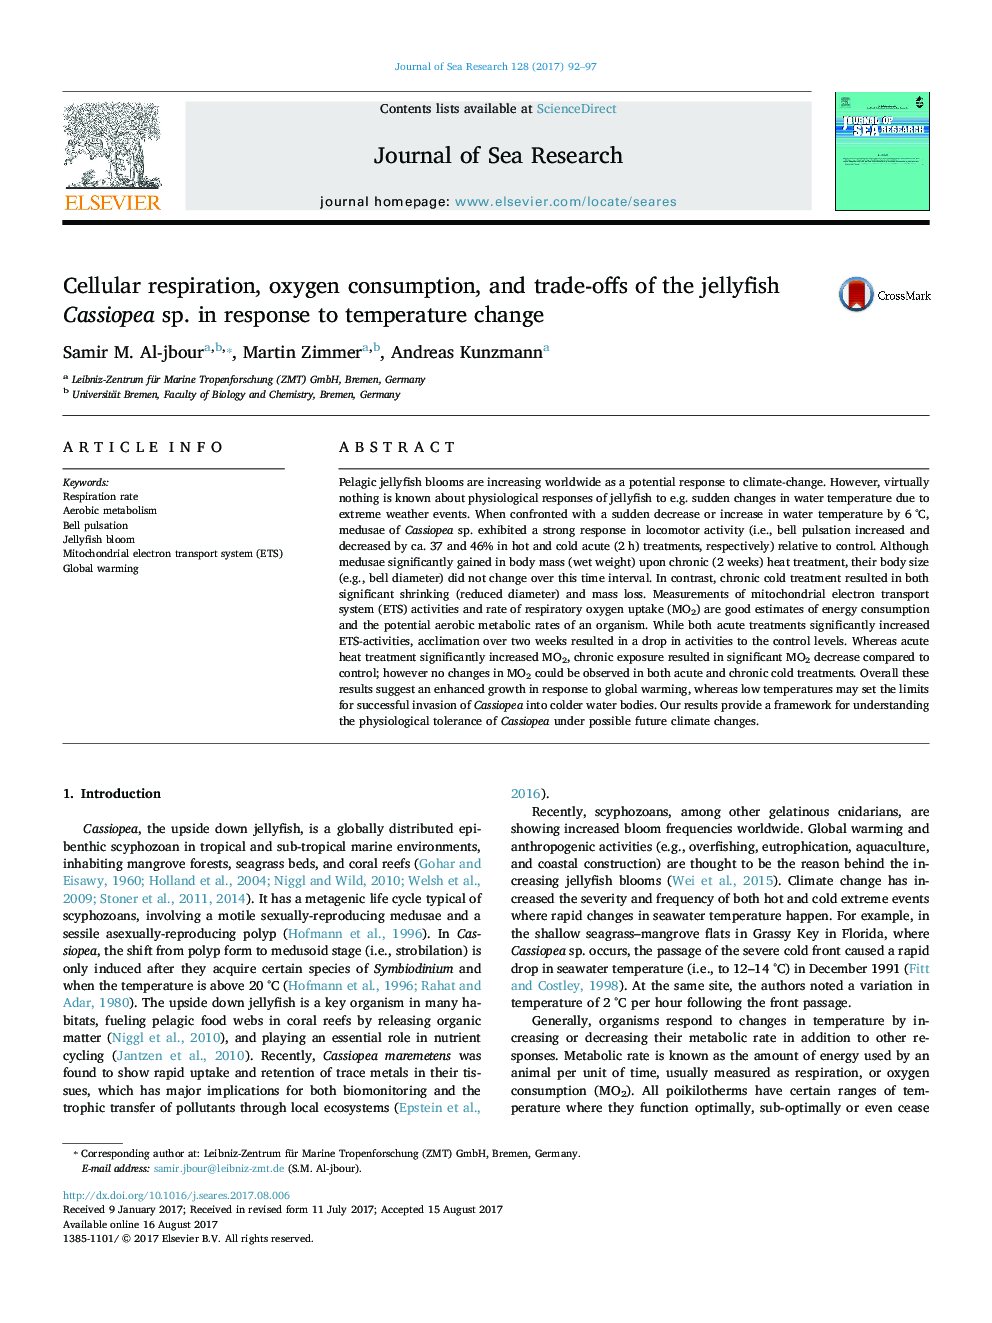 Cellular respiration, oxygen consumption, and trade-offs of the jellyfish Cassiopea sp. in response to temperature change